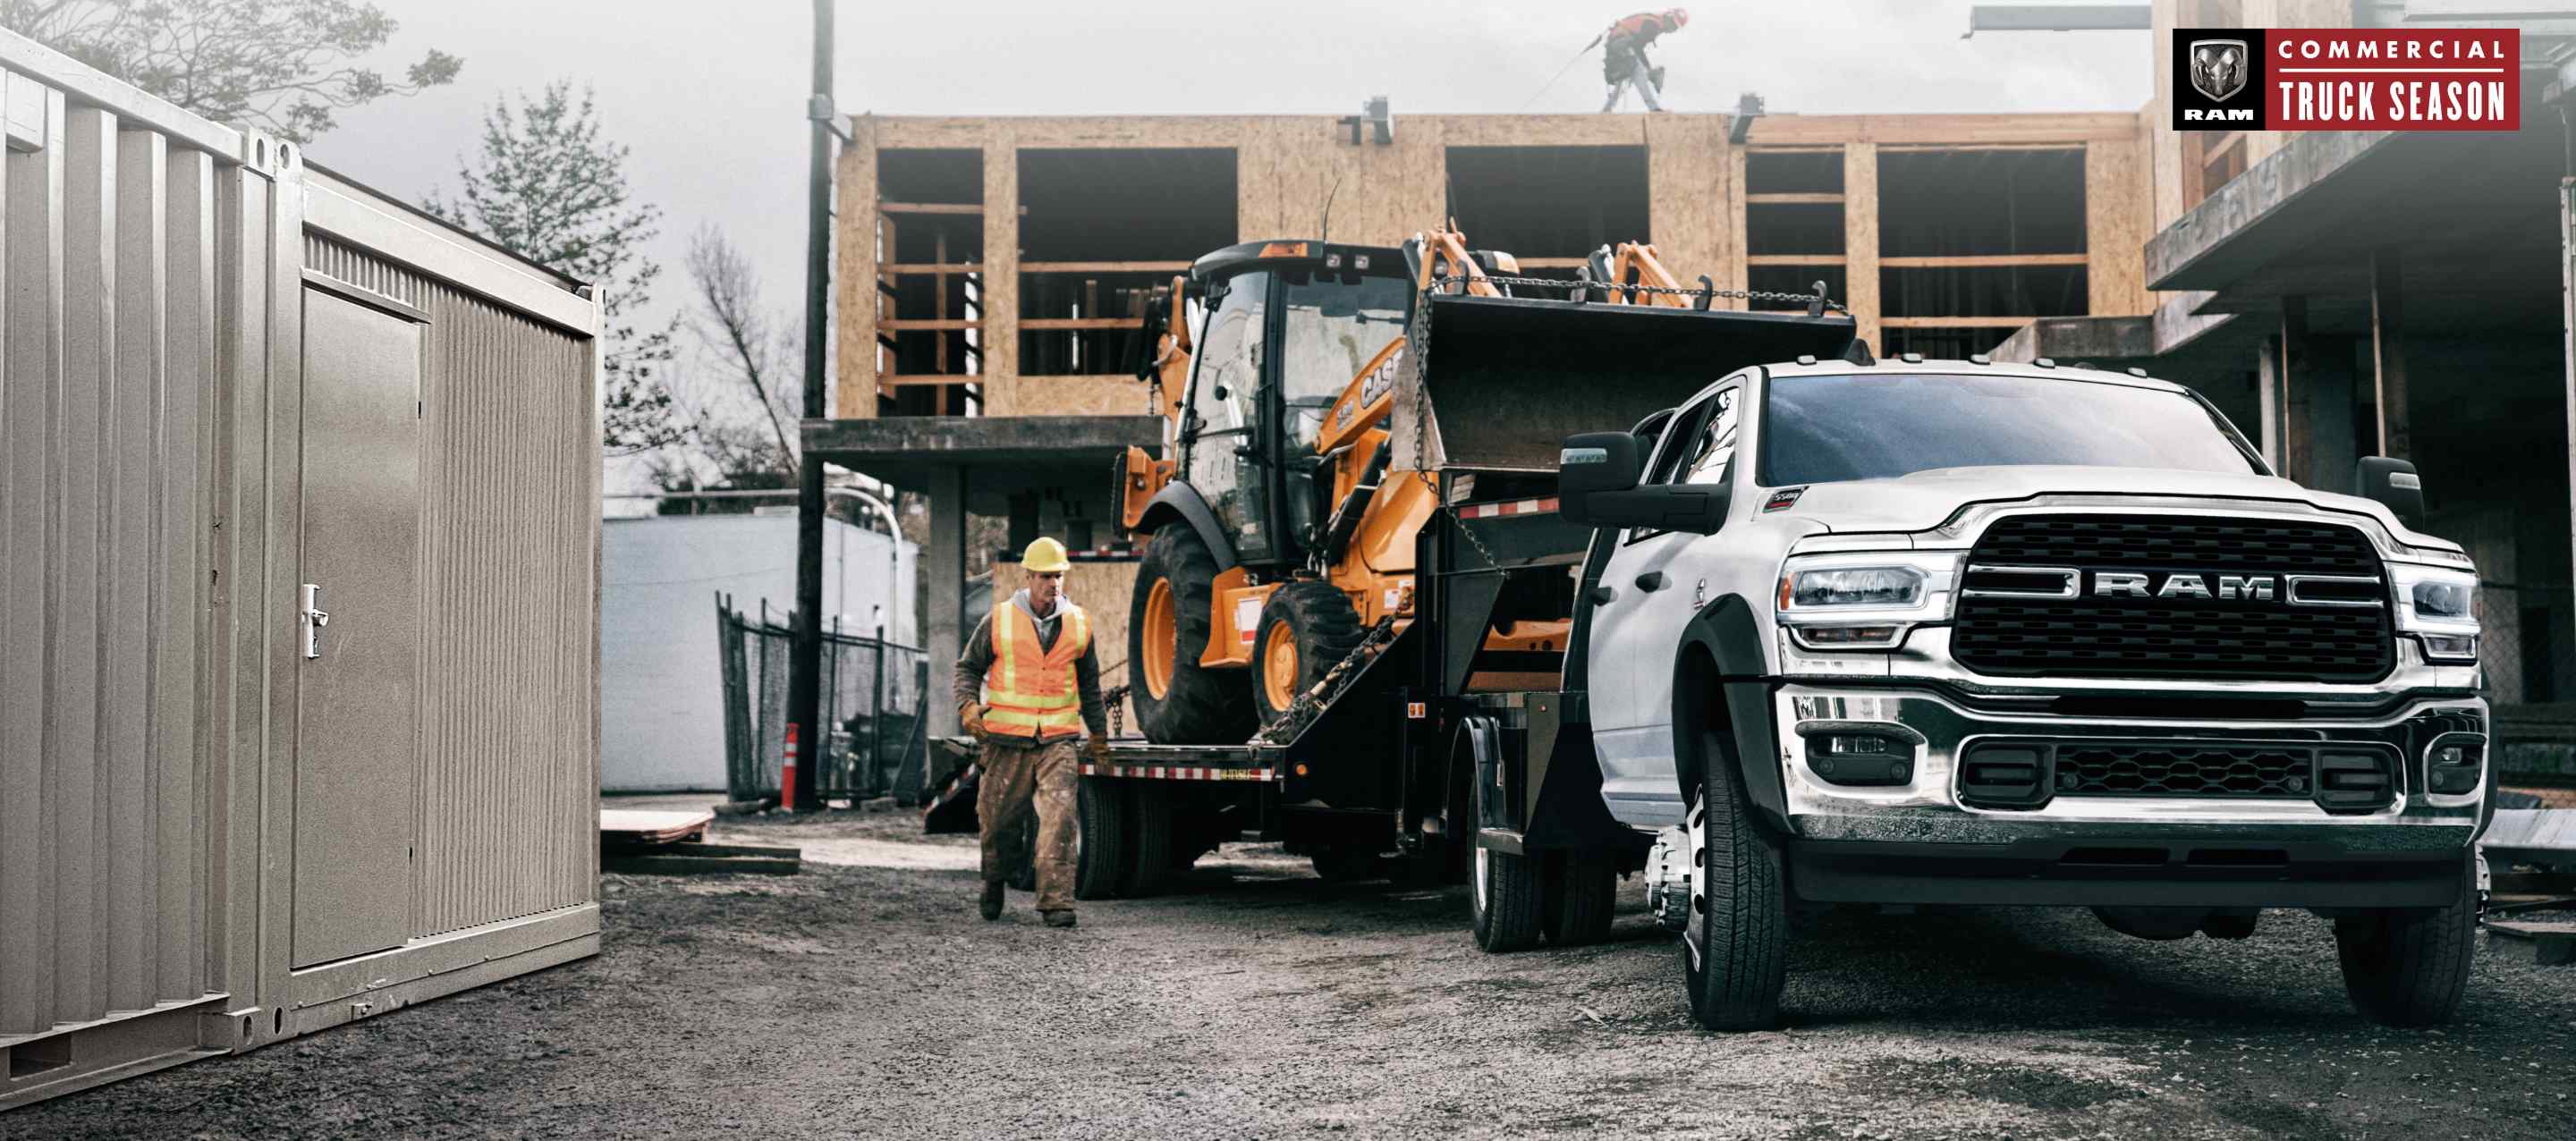 A white 2023 Ram 5500 SLT Chassis Crew Cab on a construction site with an excavator in tow. Ram Commercial Truck Season.